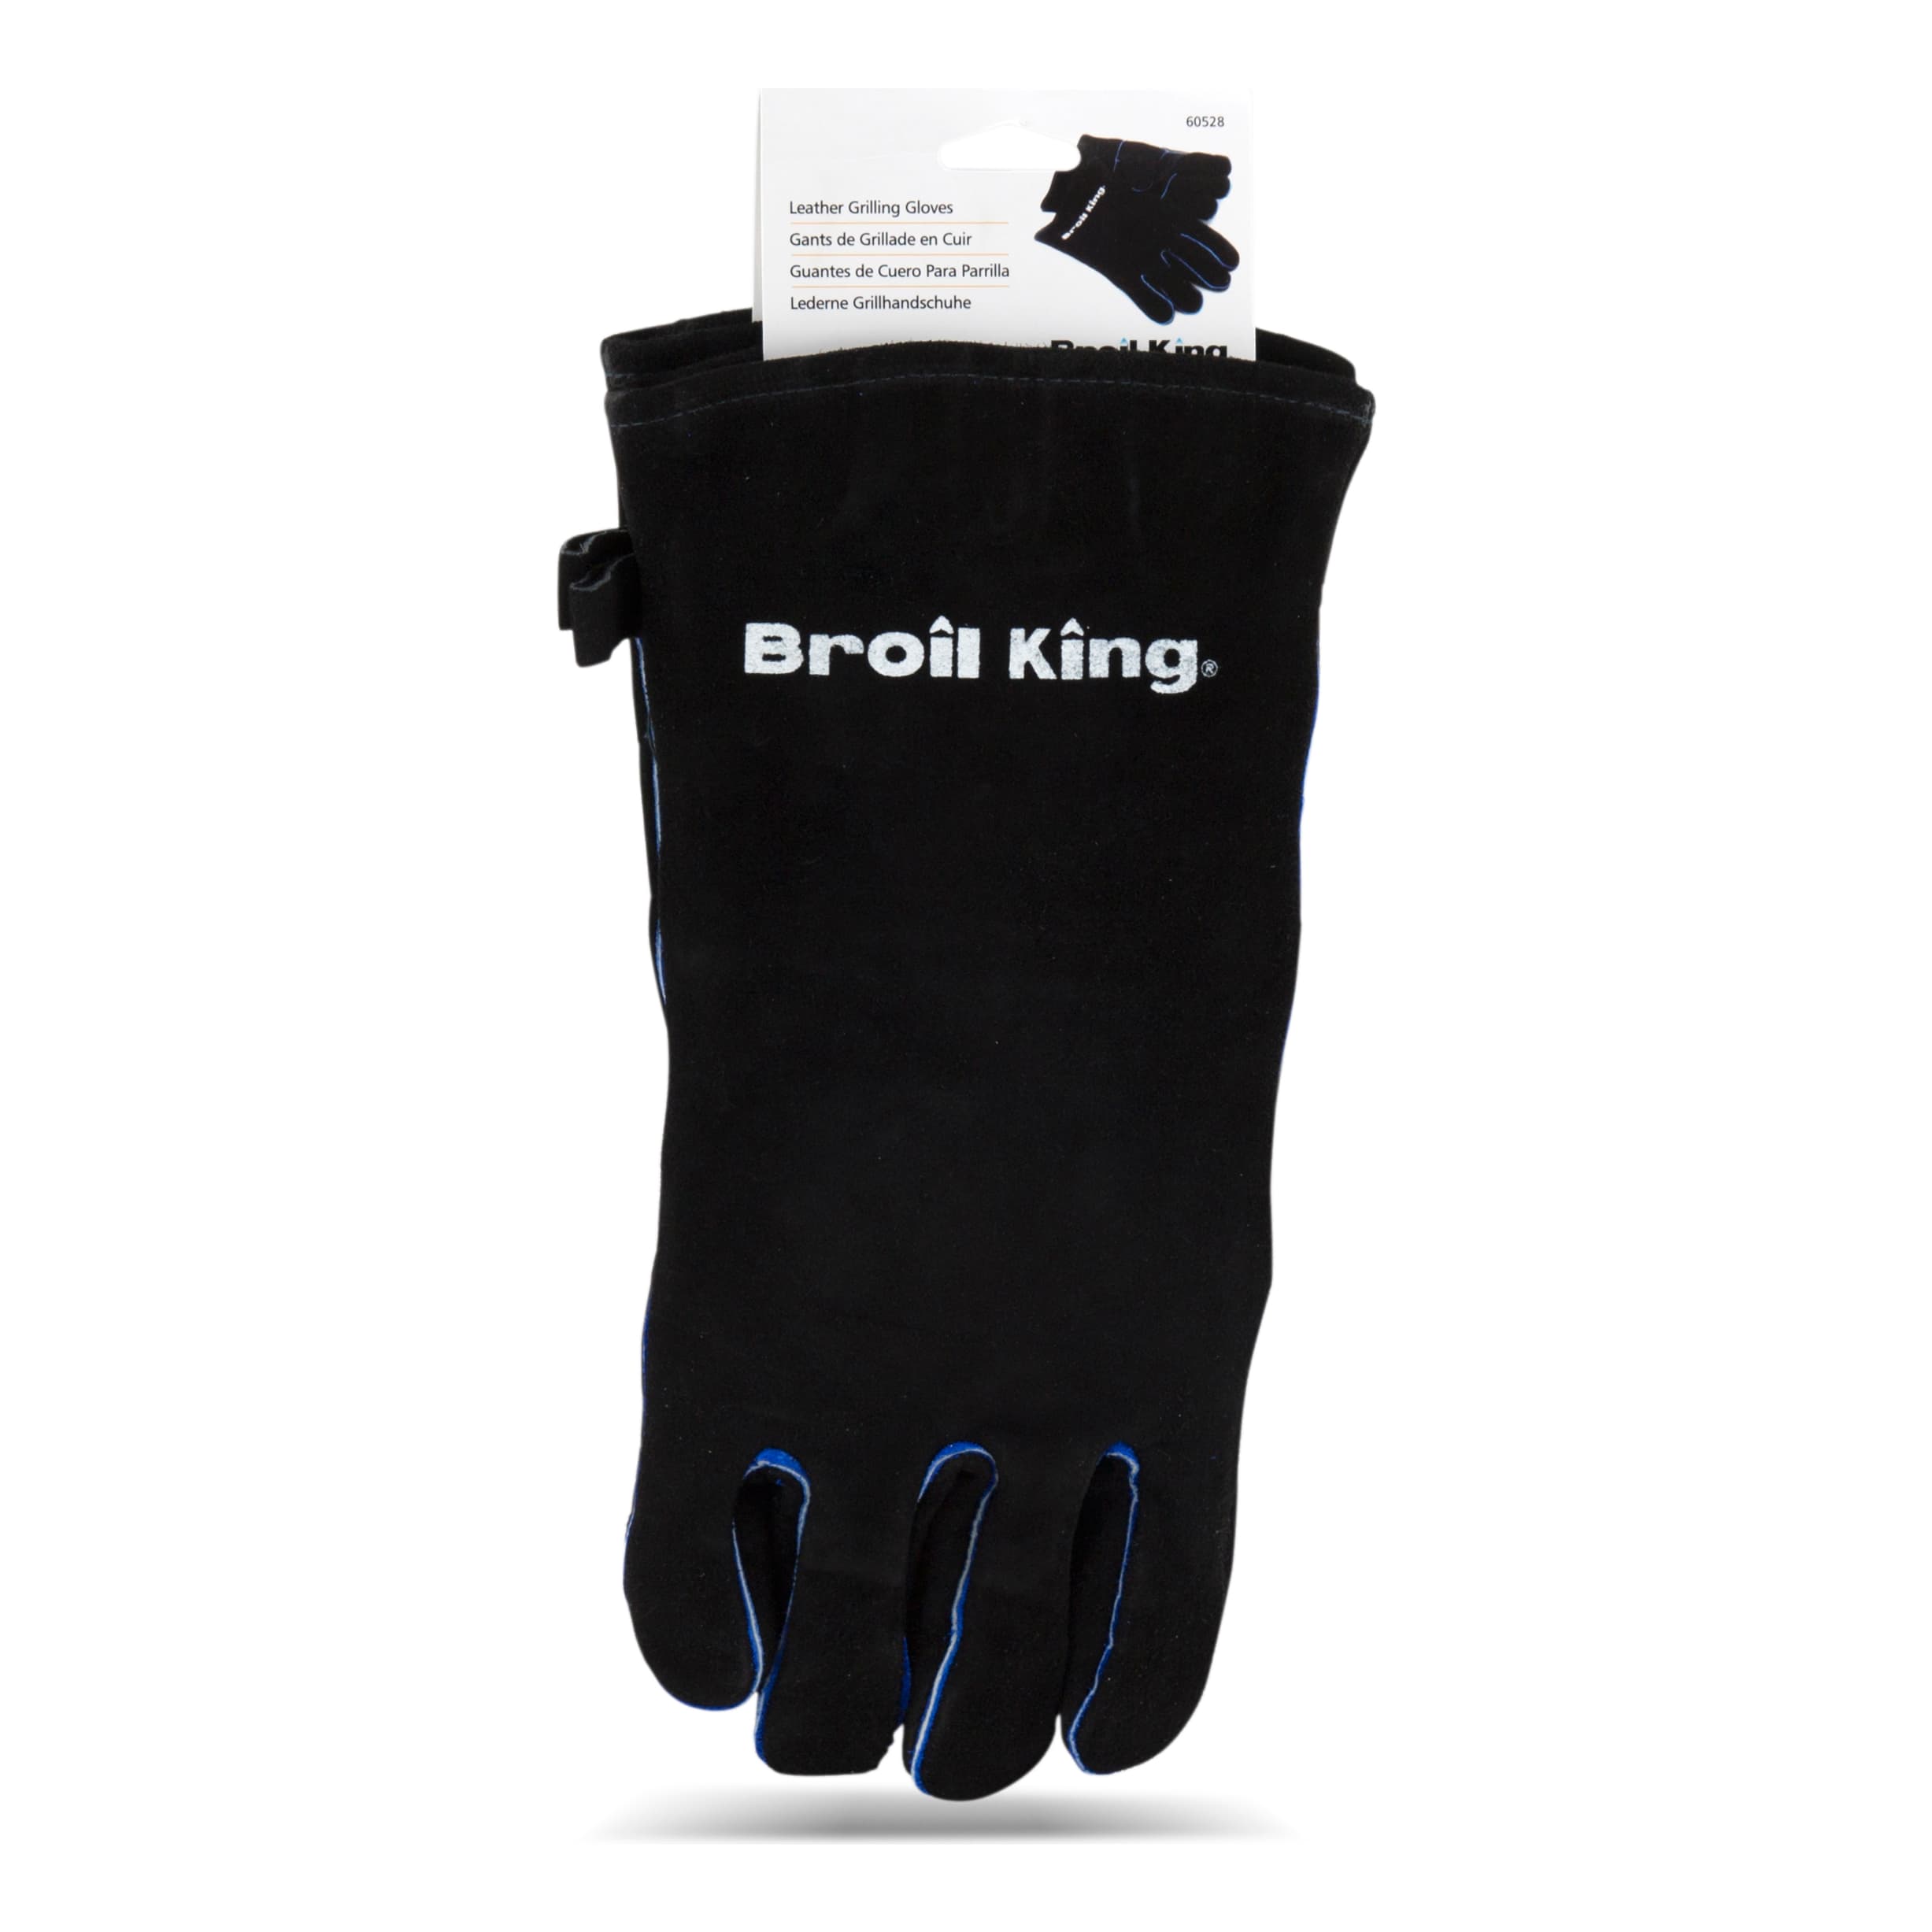 Broil King® Leather Grilling Gloves